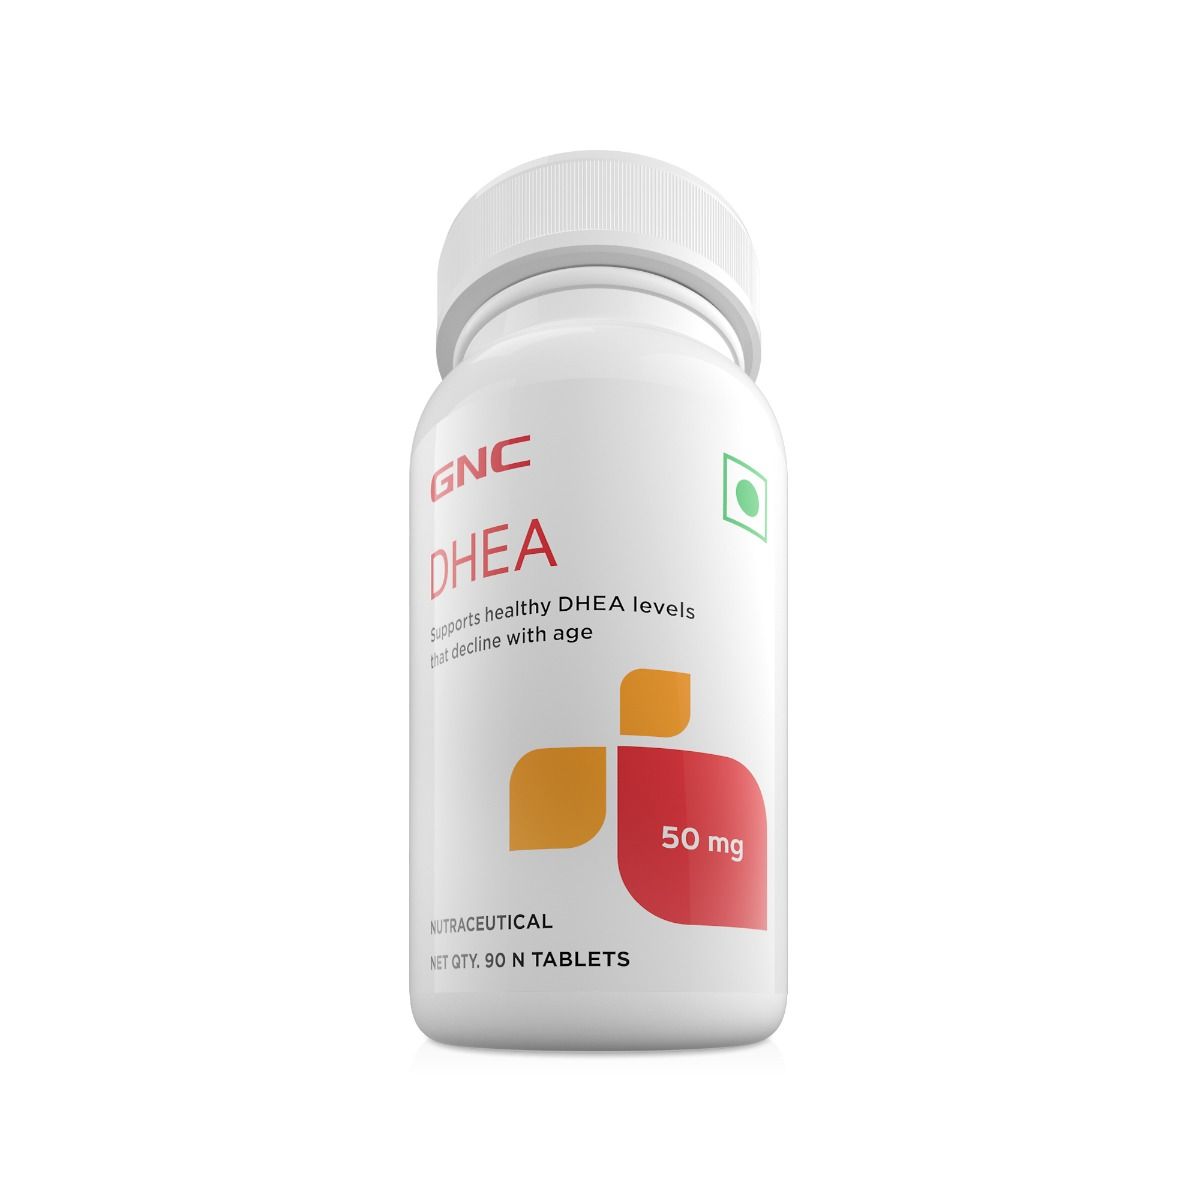 GNC DHEA Capsules - Maintains DHEA Levels | Supports Reproductive Health & Hormonal Function